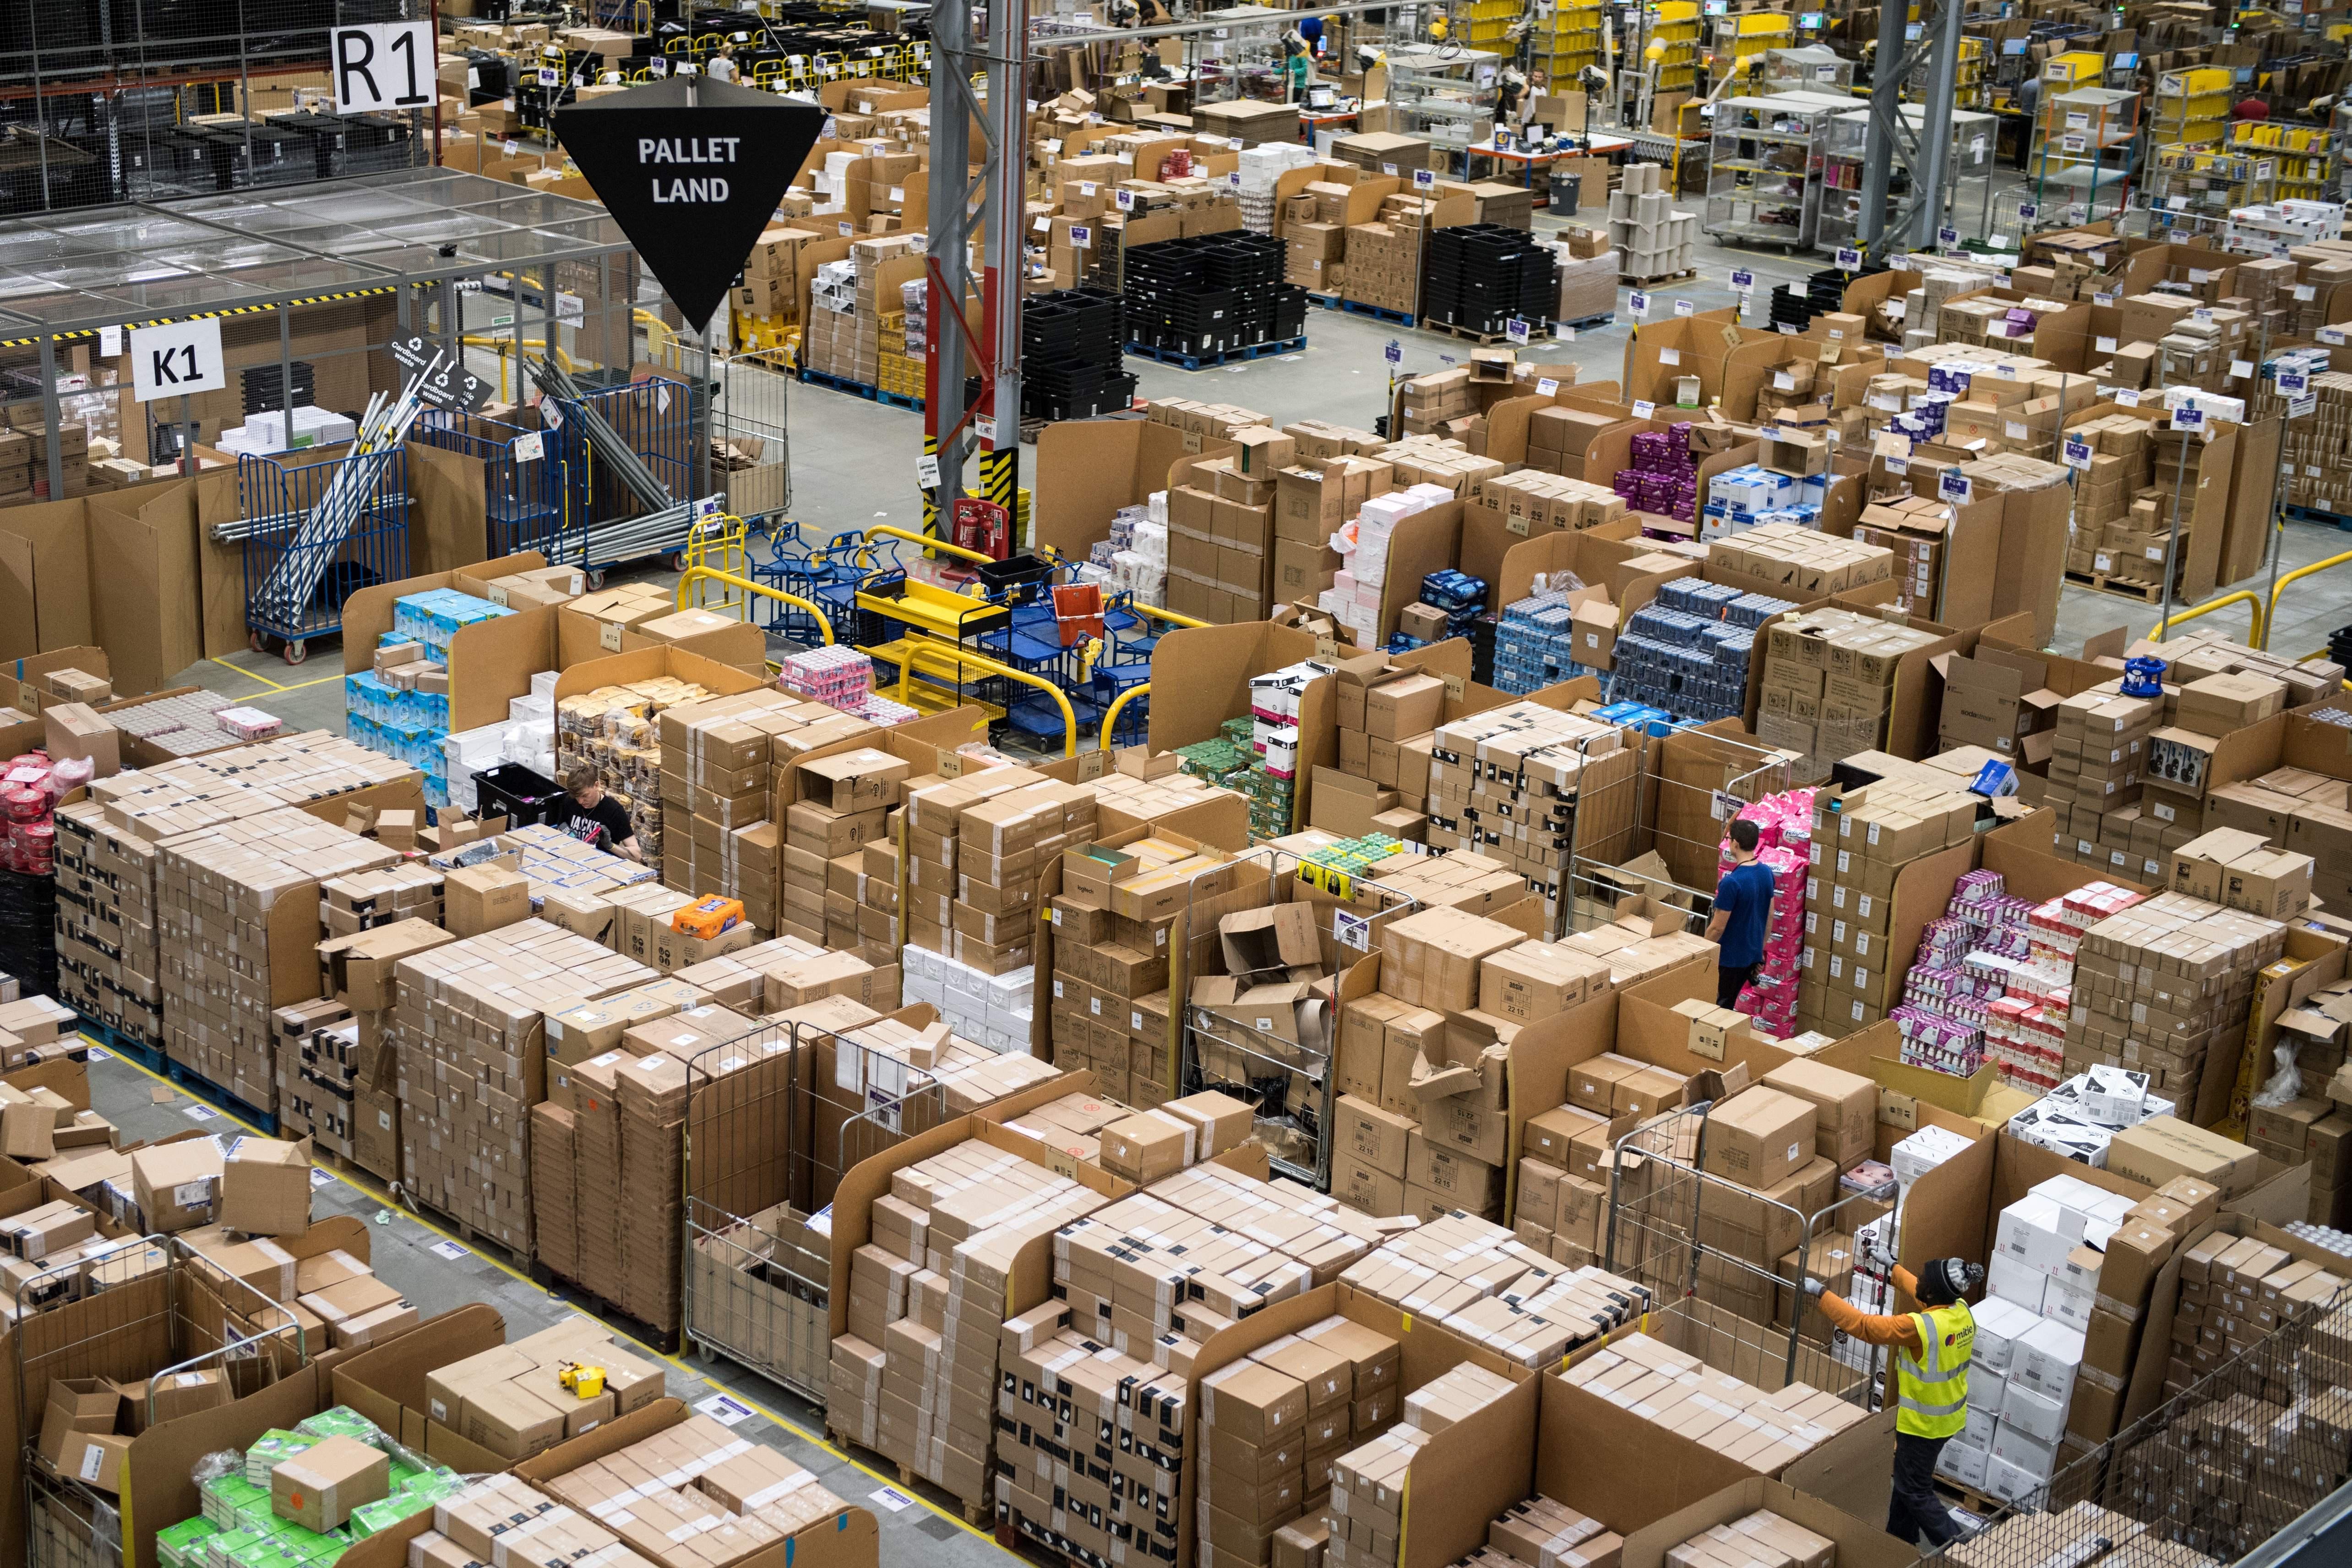 Workers prepare customer orders for dispatch as they work around goods stored inside an Amazon.co.uk fulfillment centre in Peterborough, central England, on November 15, 2017.
Shops could be seeing the effect of consumers postponing purchases until 'Black Friday' on November 24, 2017, a day of sales in the United States that has become increasingly popular in Britain. / AFP PHOTO / CHRIS J RATCLIFFE        (Photo credit should read CHRIS J RATCLIFFE/AFP/Getty Images)